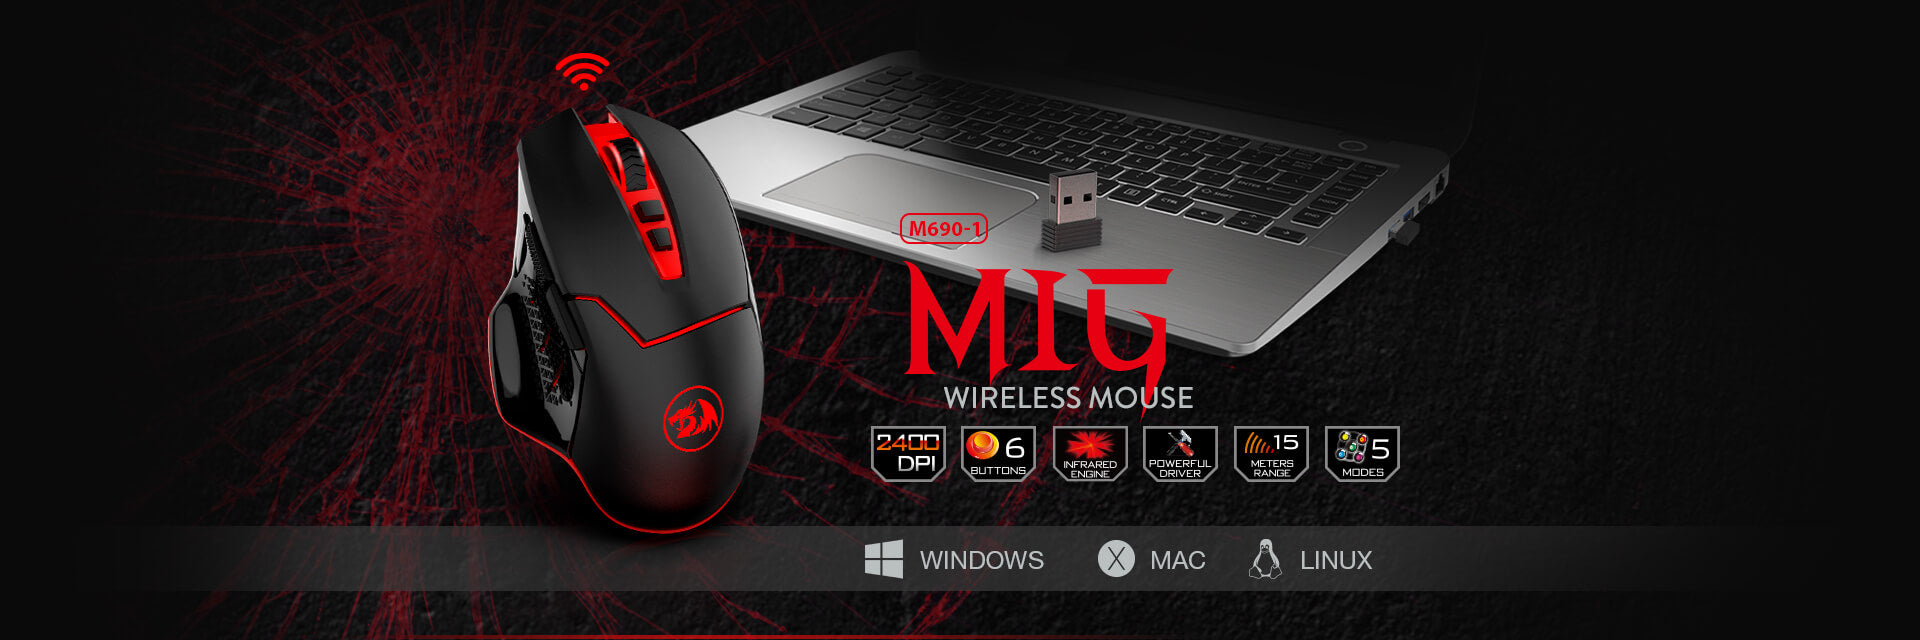 redragon wireless gaming mouse